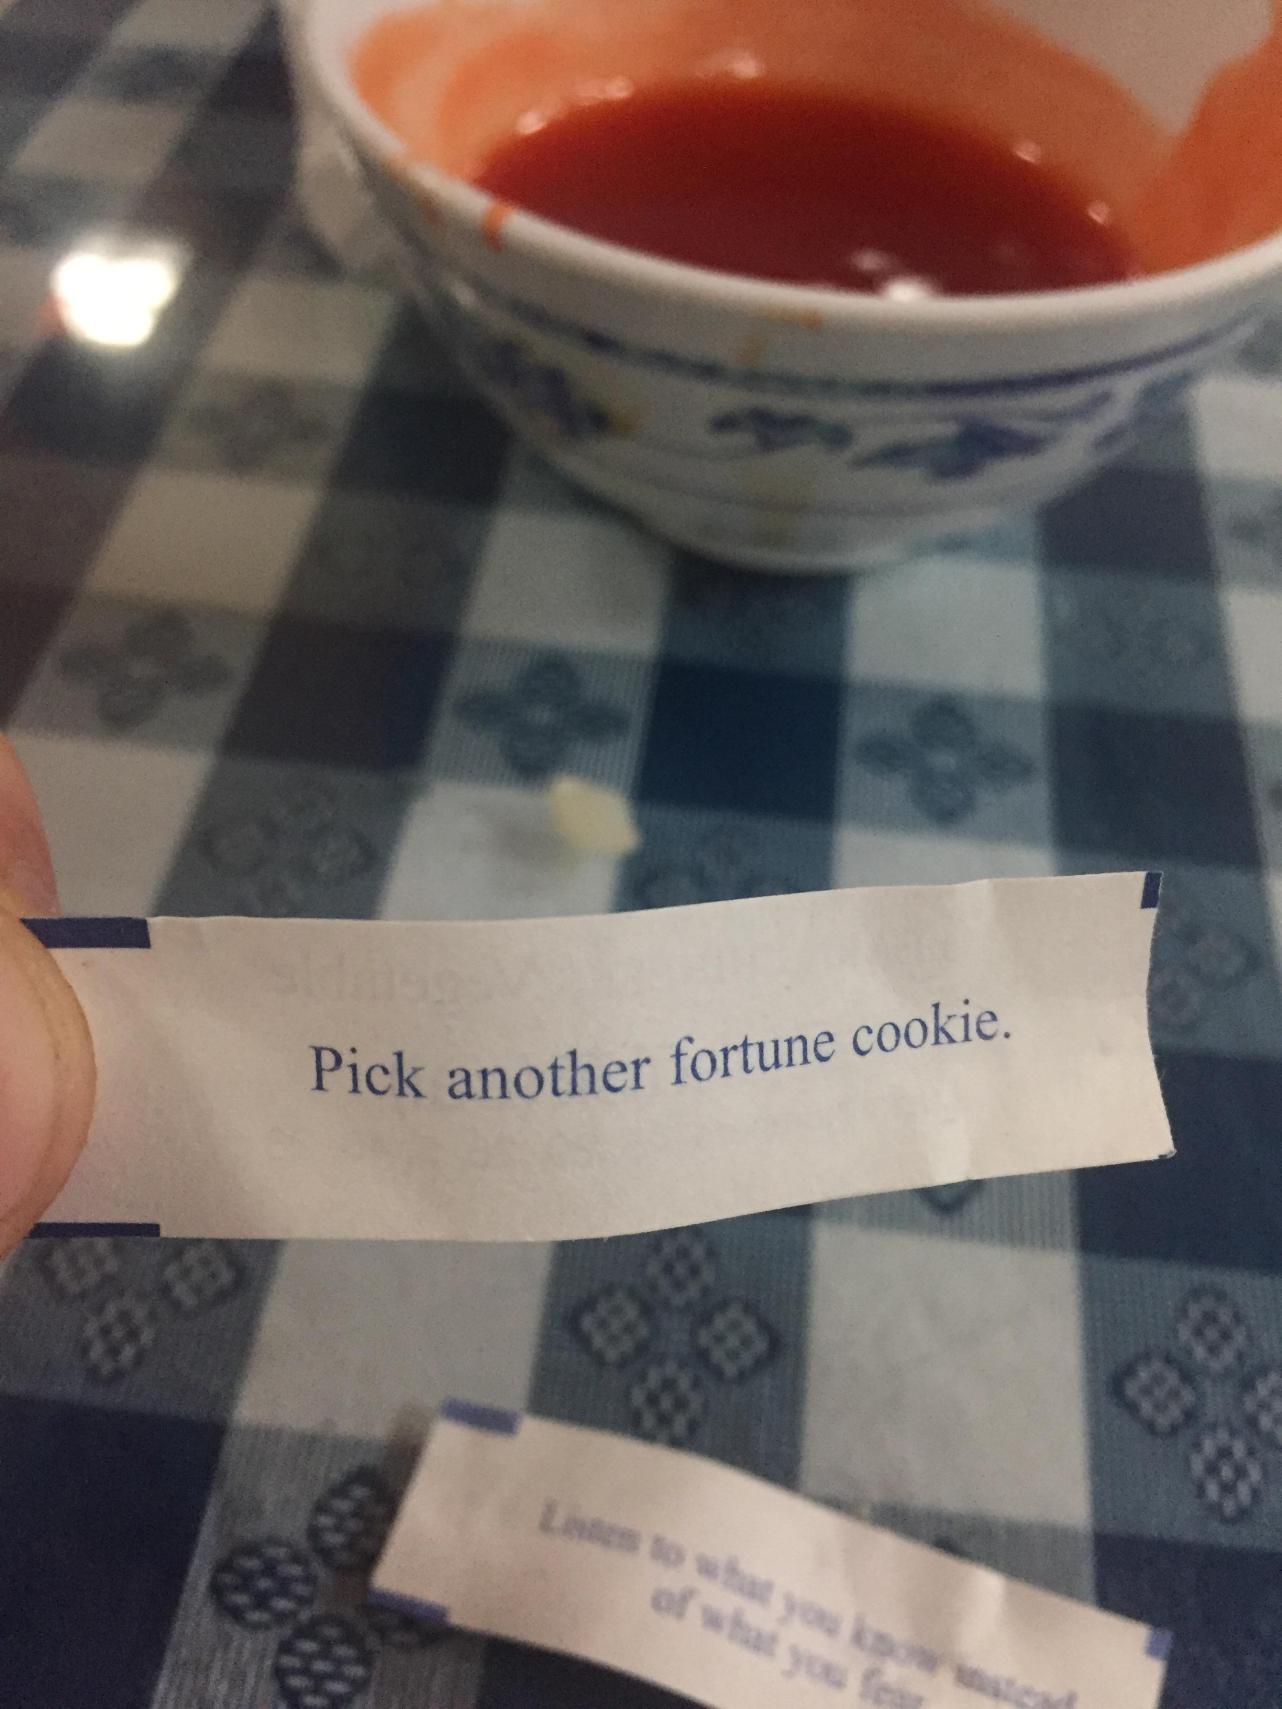 fortune cookie telling you to get another fortune cookie